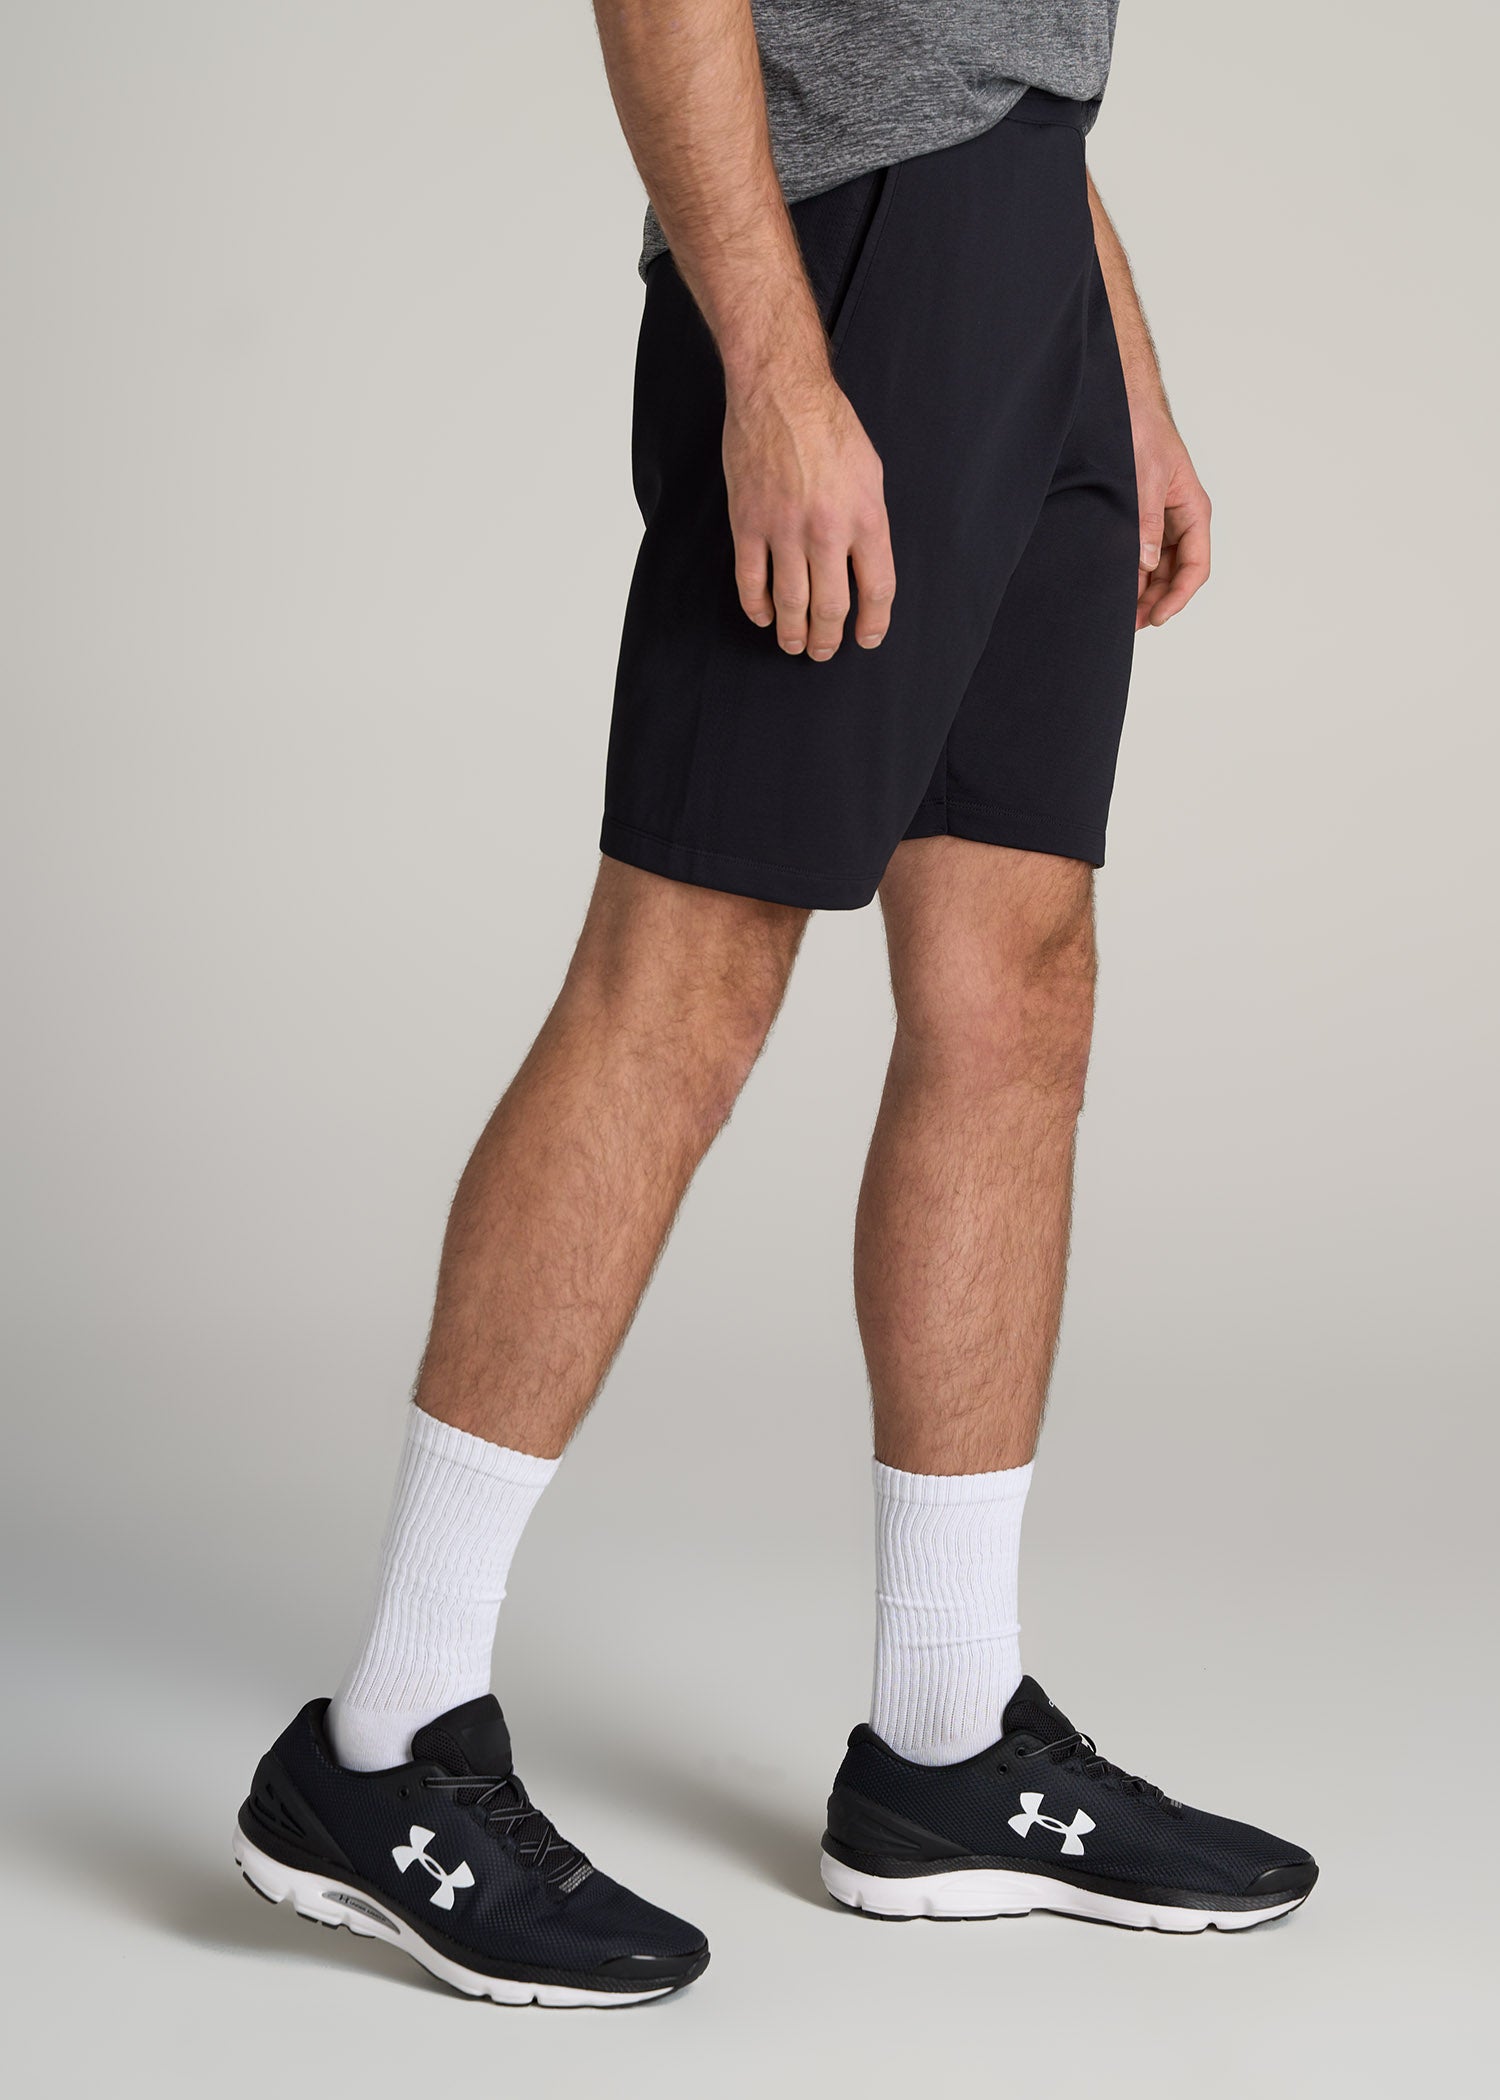 Workout Shorts for Tall Men: Tech Black Short Engineered – American Tall